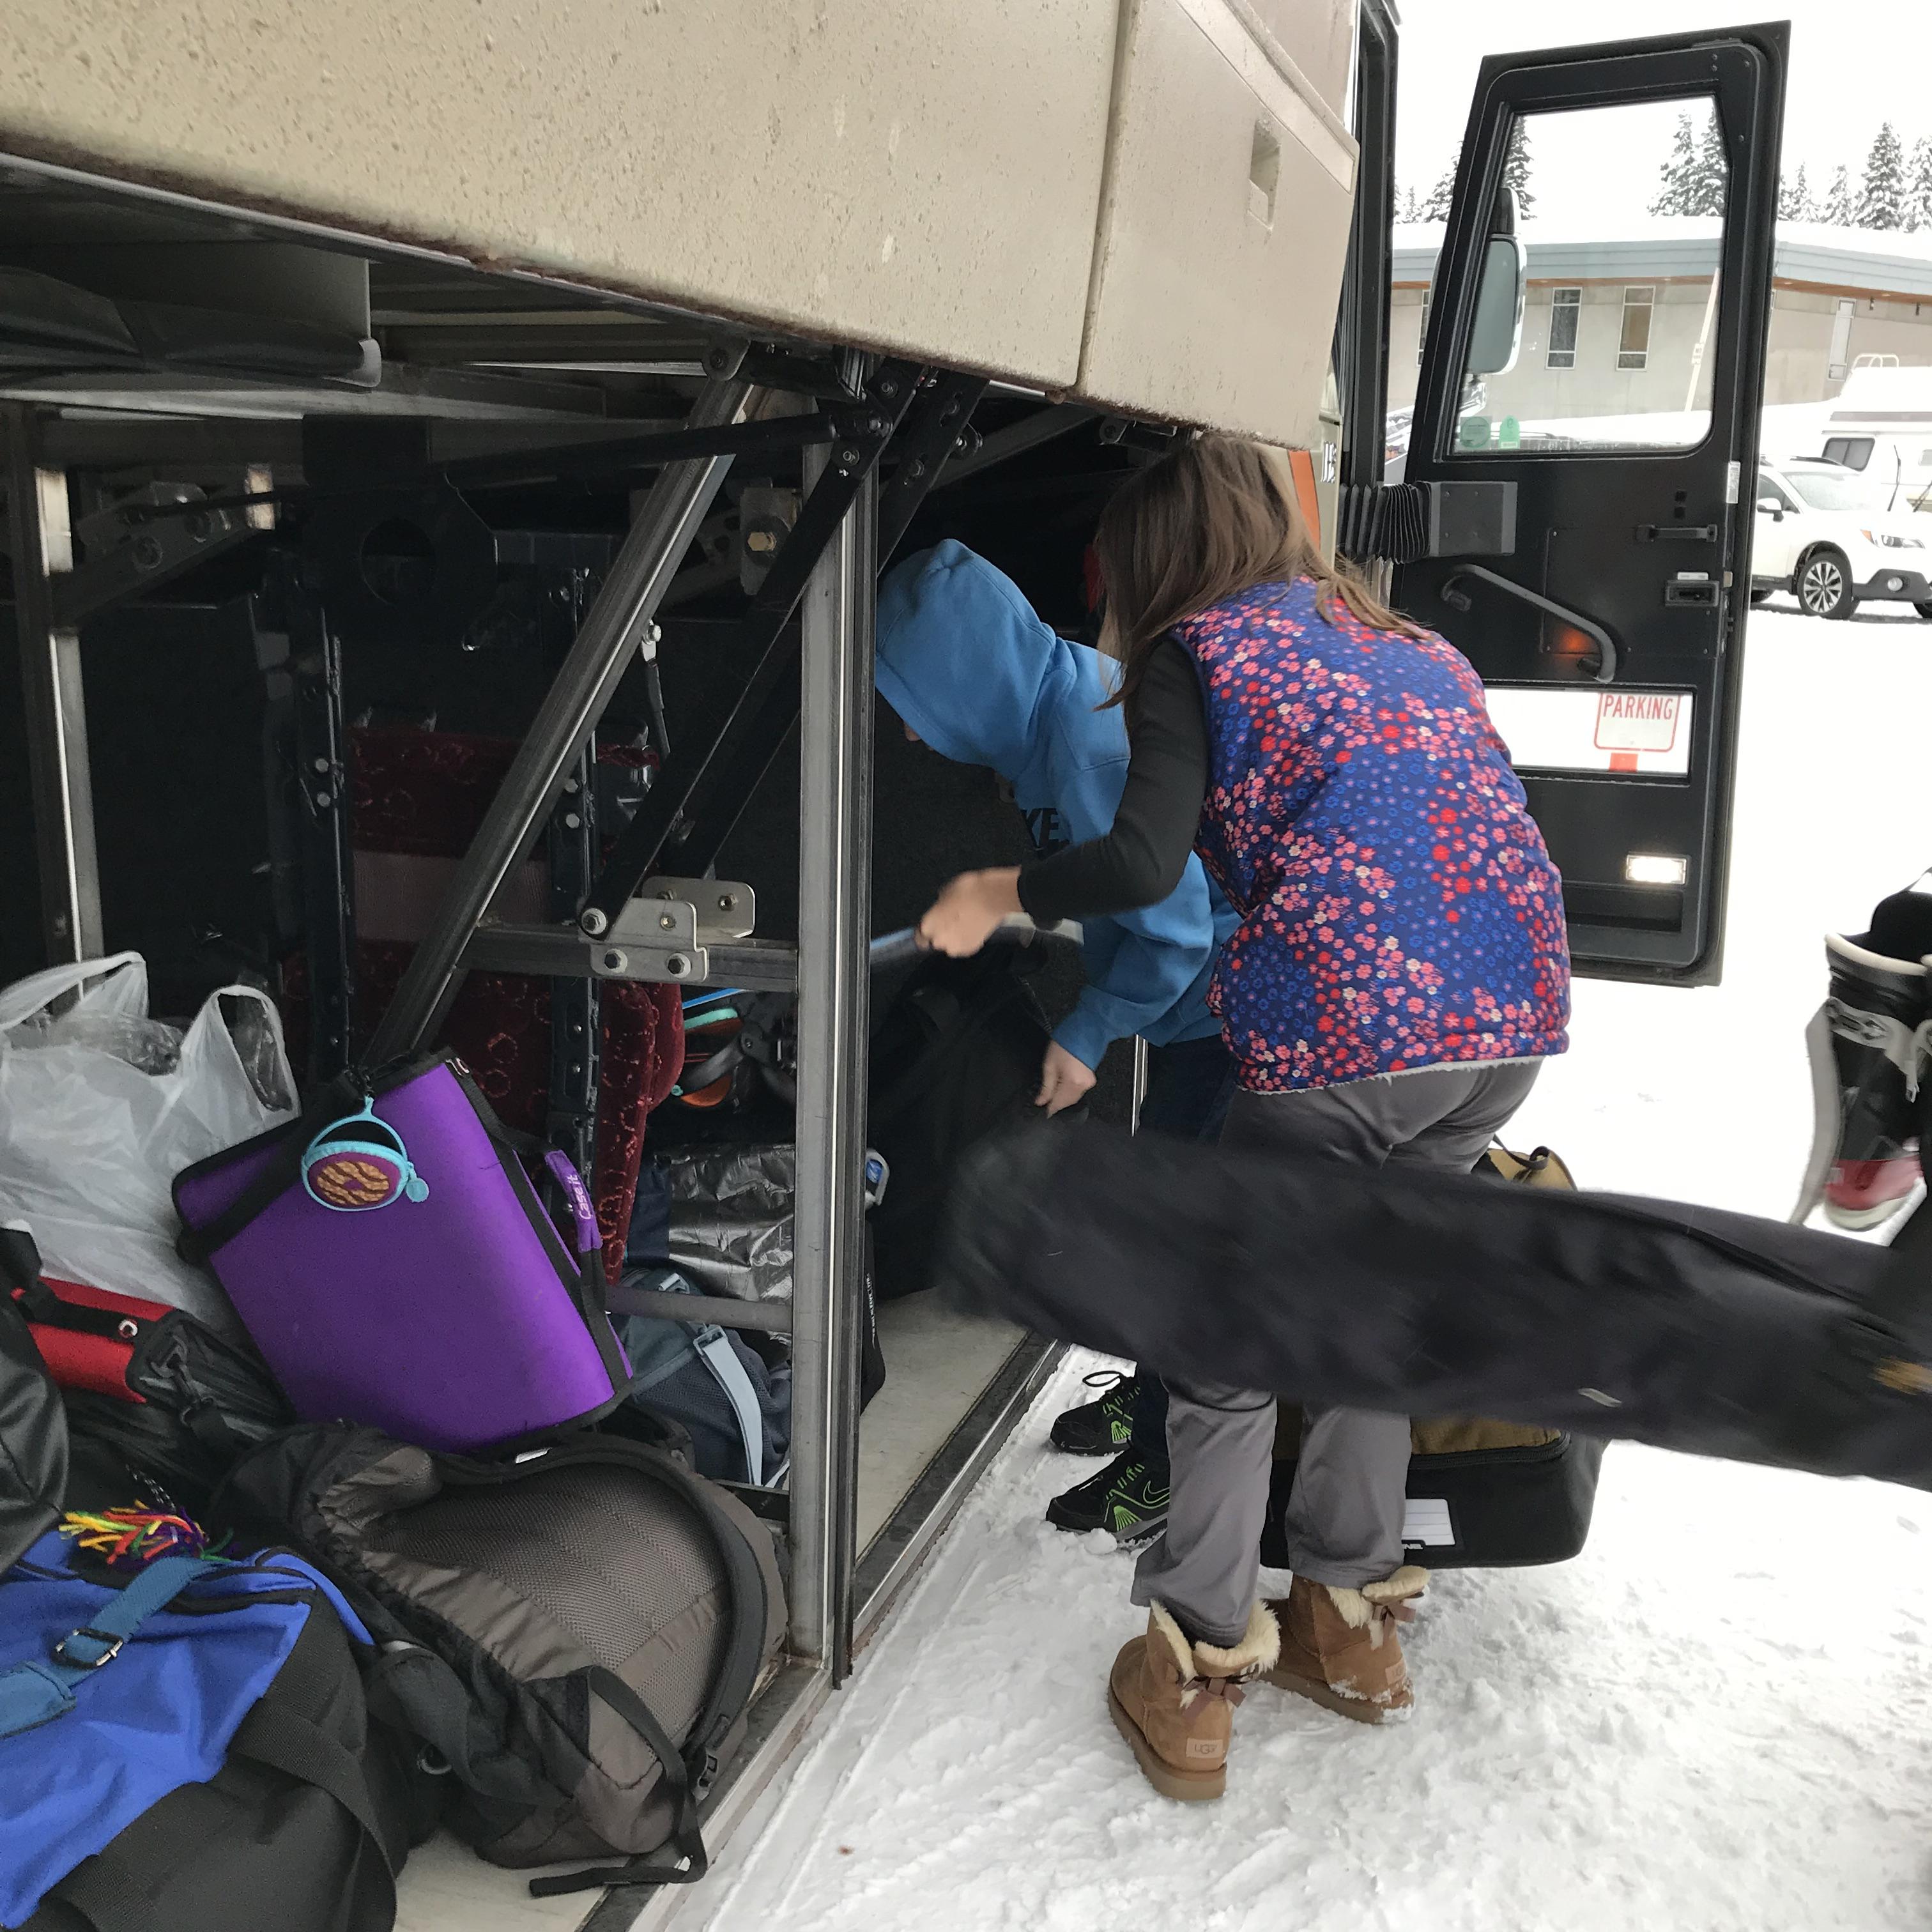 Retrieving gear from the bus